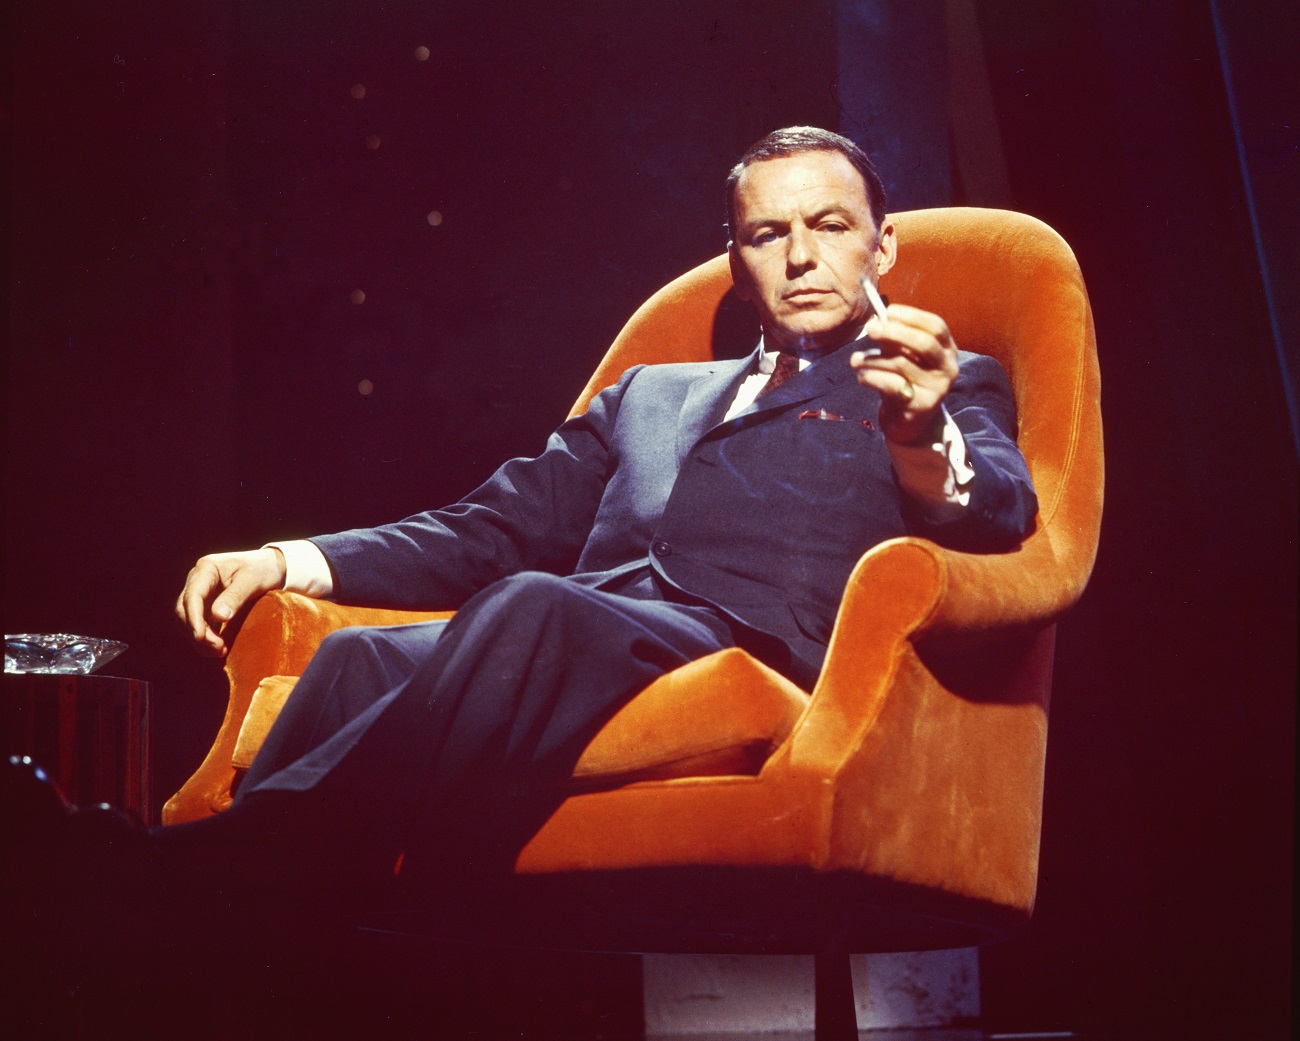 Frank Sinatra sits in an orange armchair and holds a cigarette.